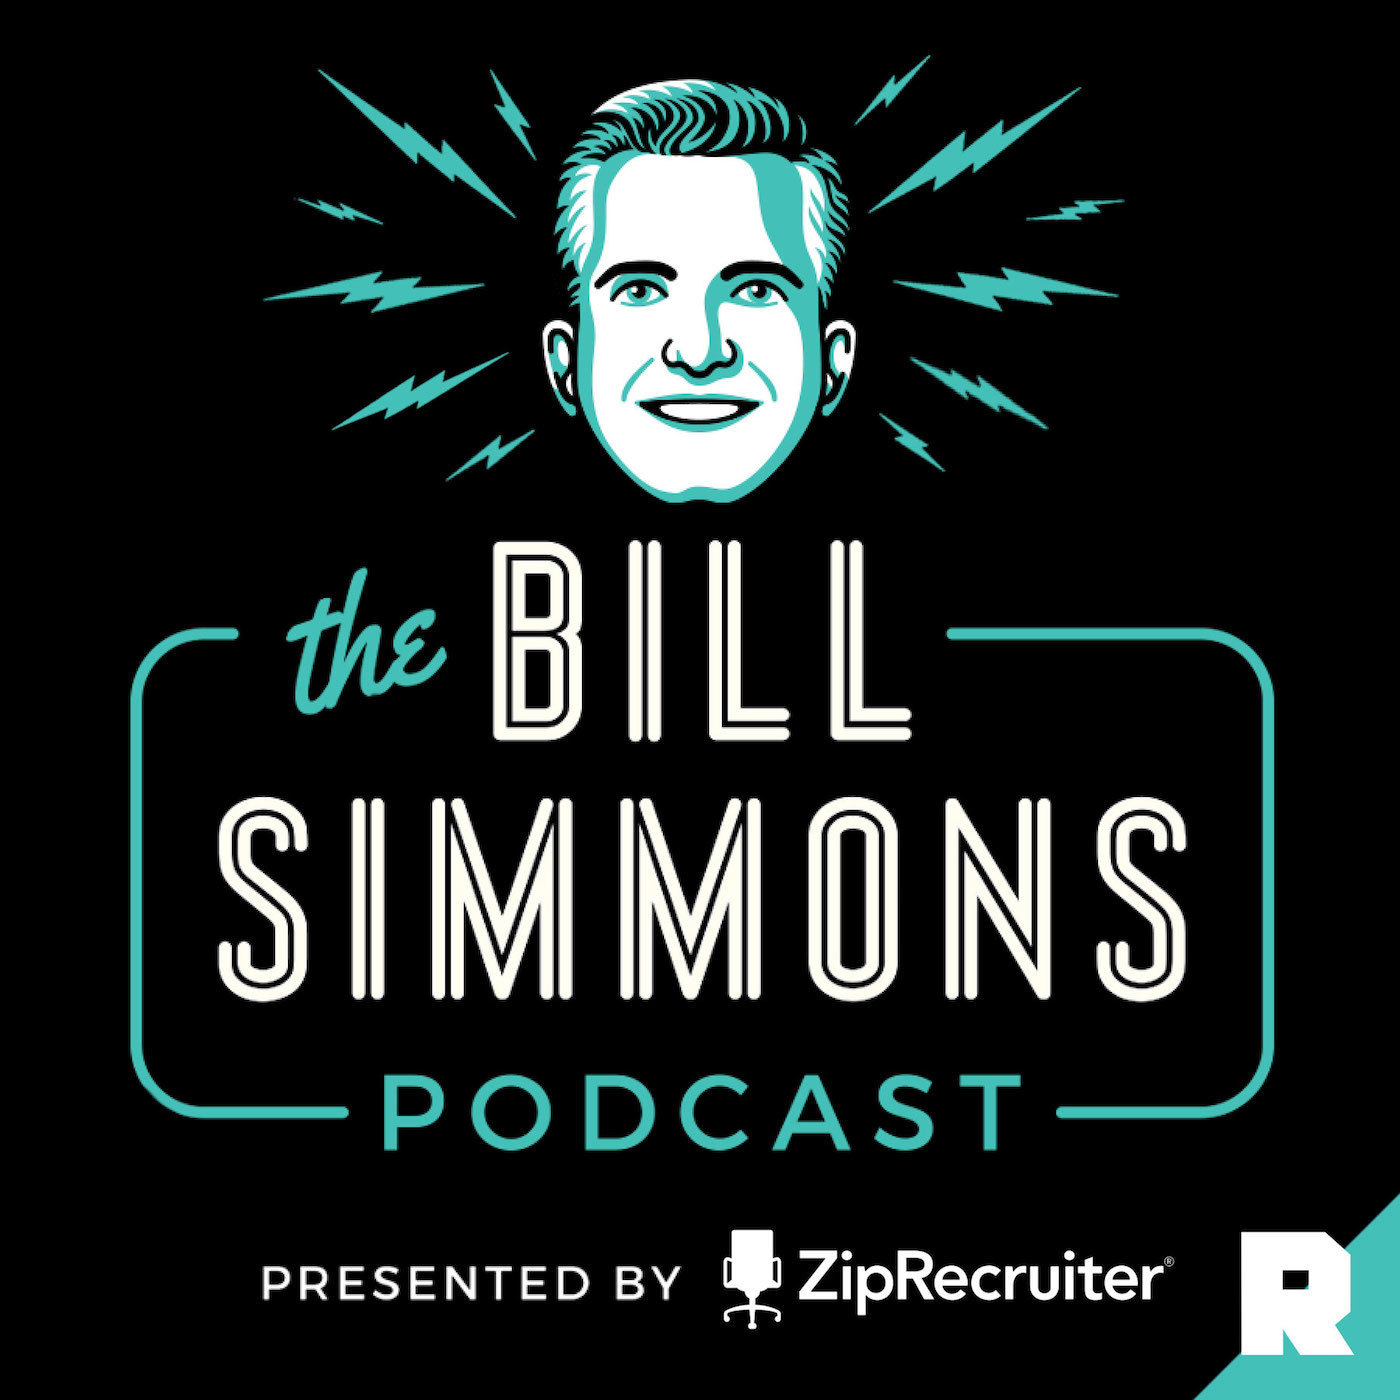 Disney vs. Everybody, Facebook’s Shadiness, Snapchat’s Comeback, and the Future of Tech With Kara Swisher | The Bill Simmons Podcast